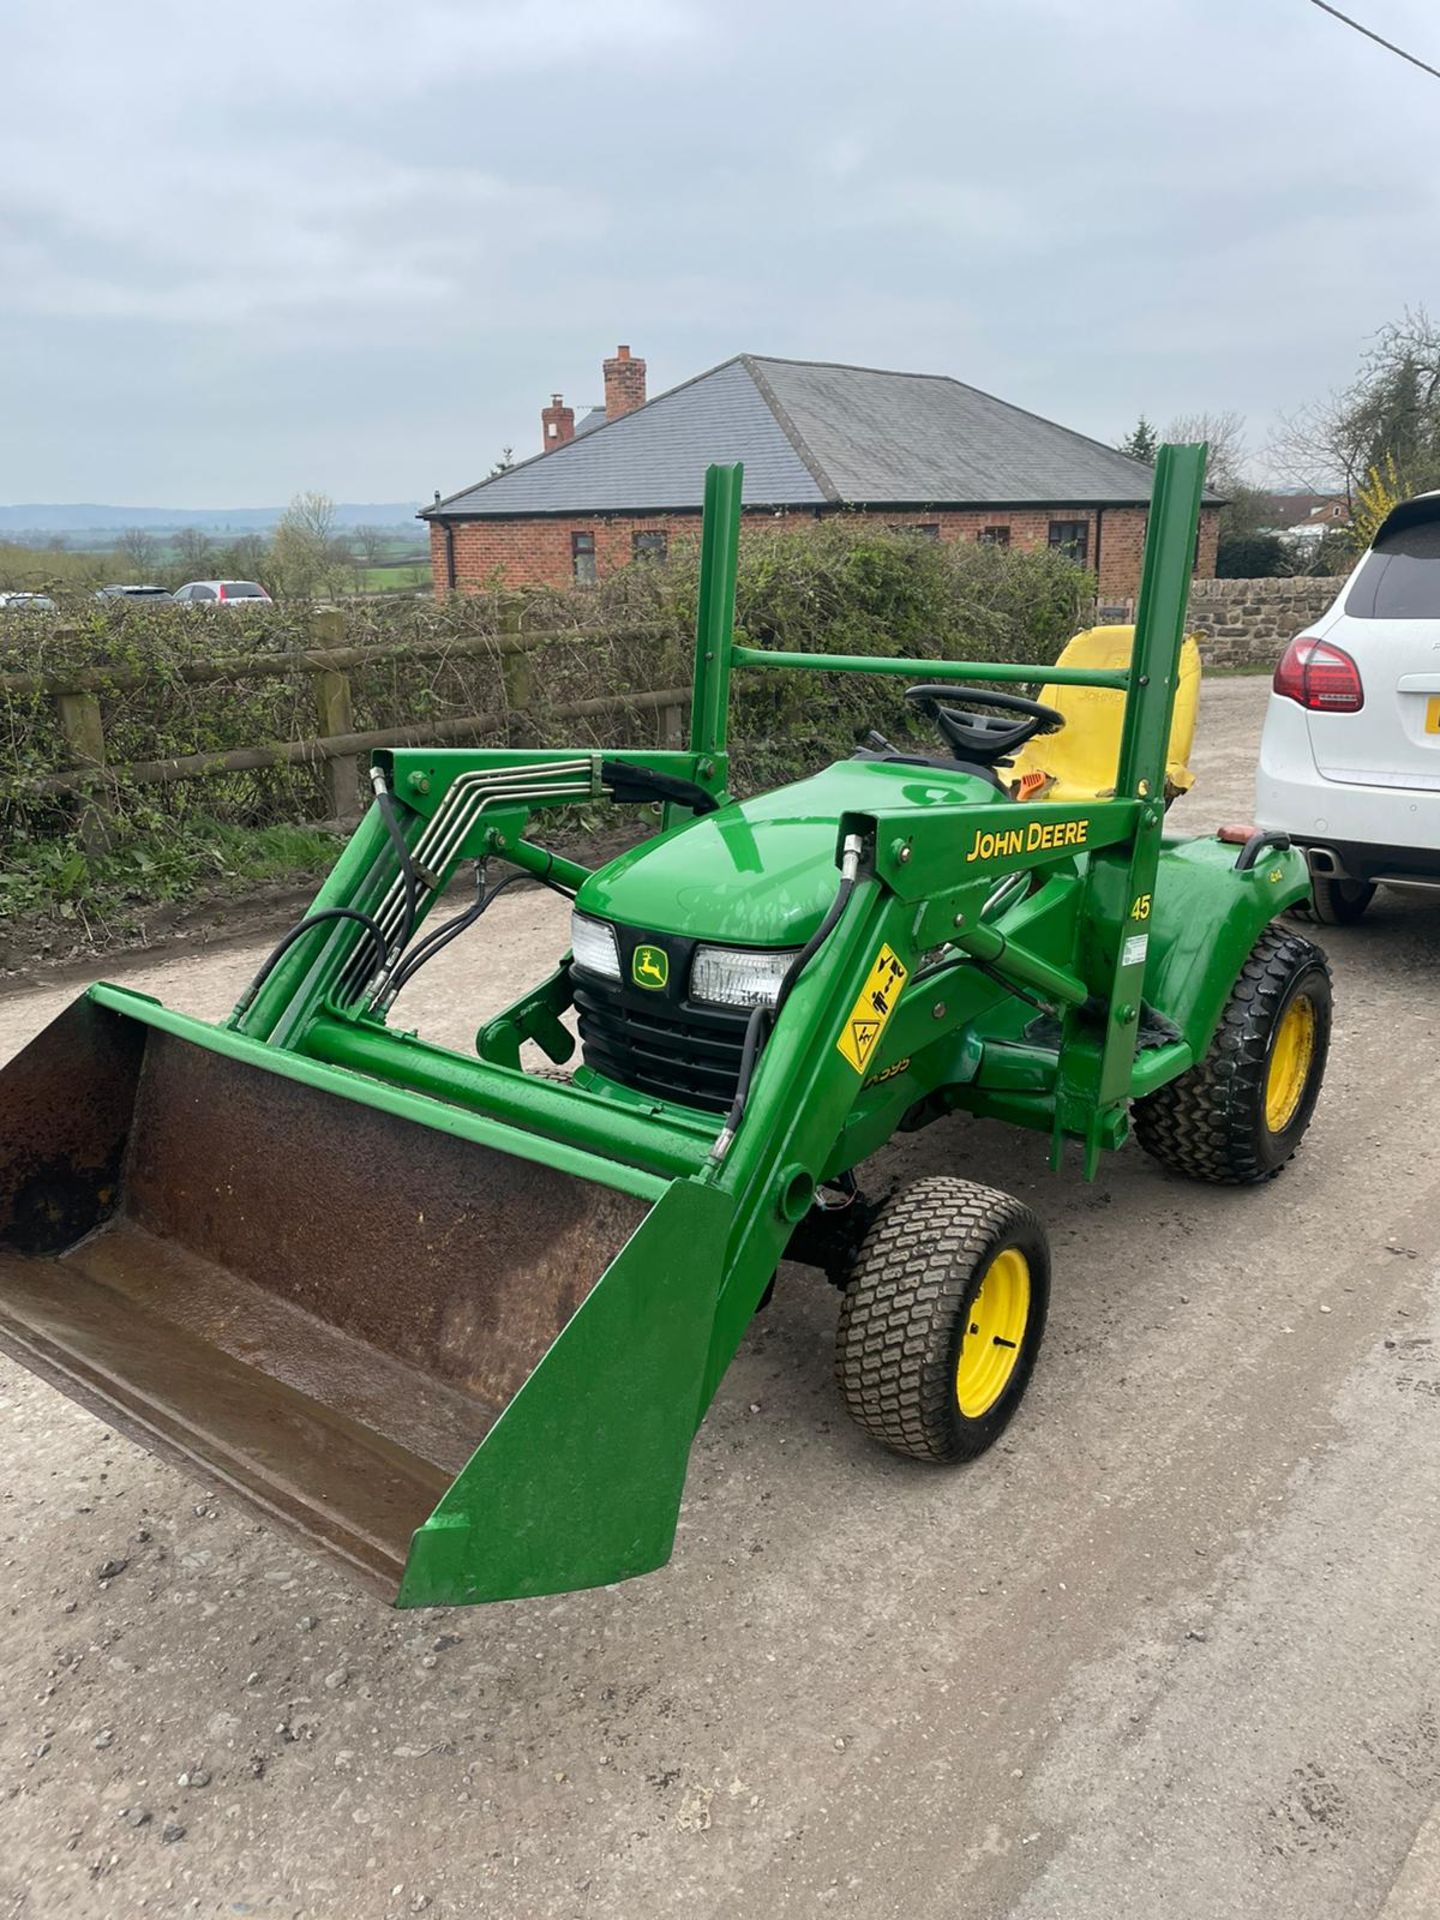 JOHN DEERE X595 COMPACT TRACTOR WITH FRONT LOADER, 4 WHEEL DRIVE, RUNS AND LIFTS *PLUS VAT* - Image 3 of 5